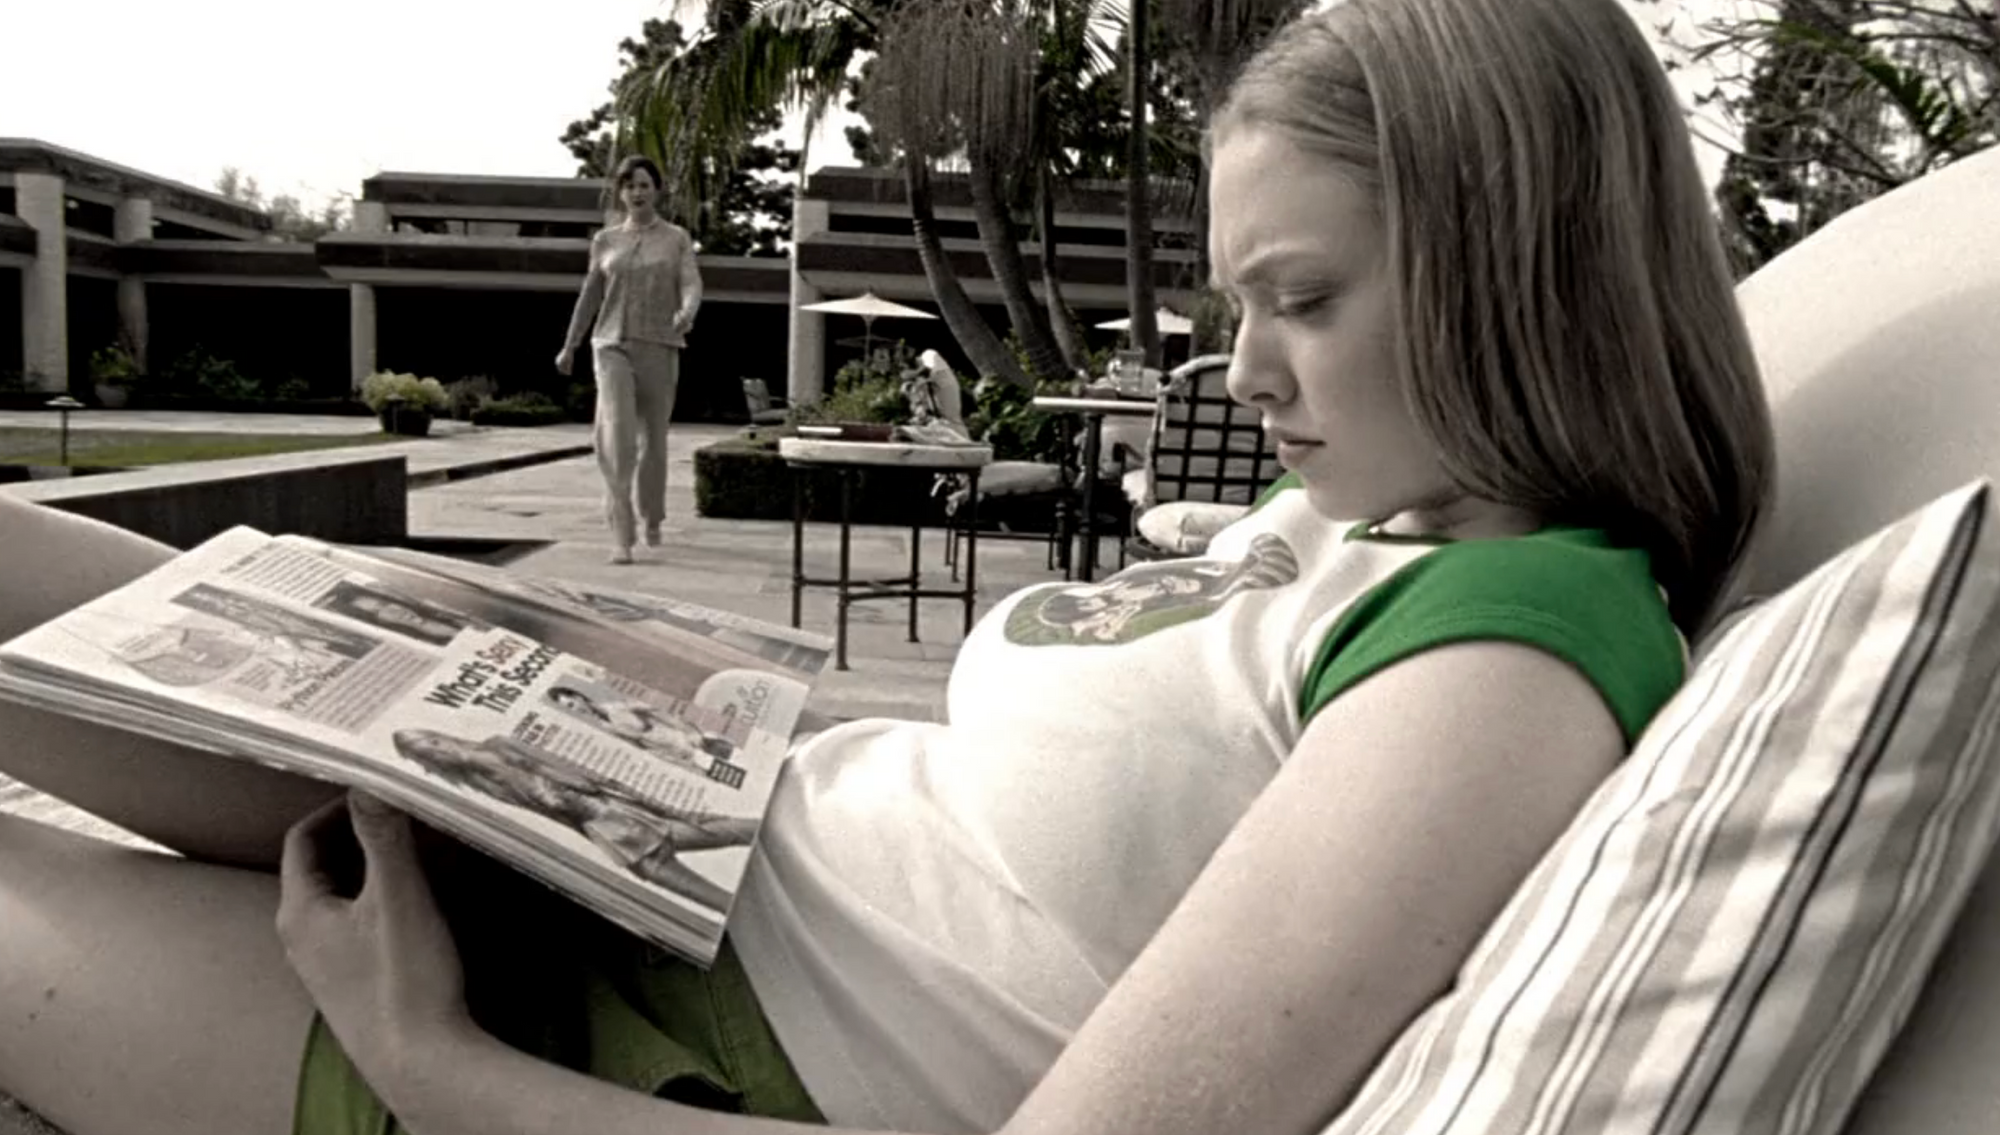 Screenshot from S1E17 of Veronica Mars. Lilly is sitting outside on a lounging chair reading a magazine. Celeste approaches in the background.